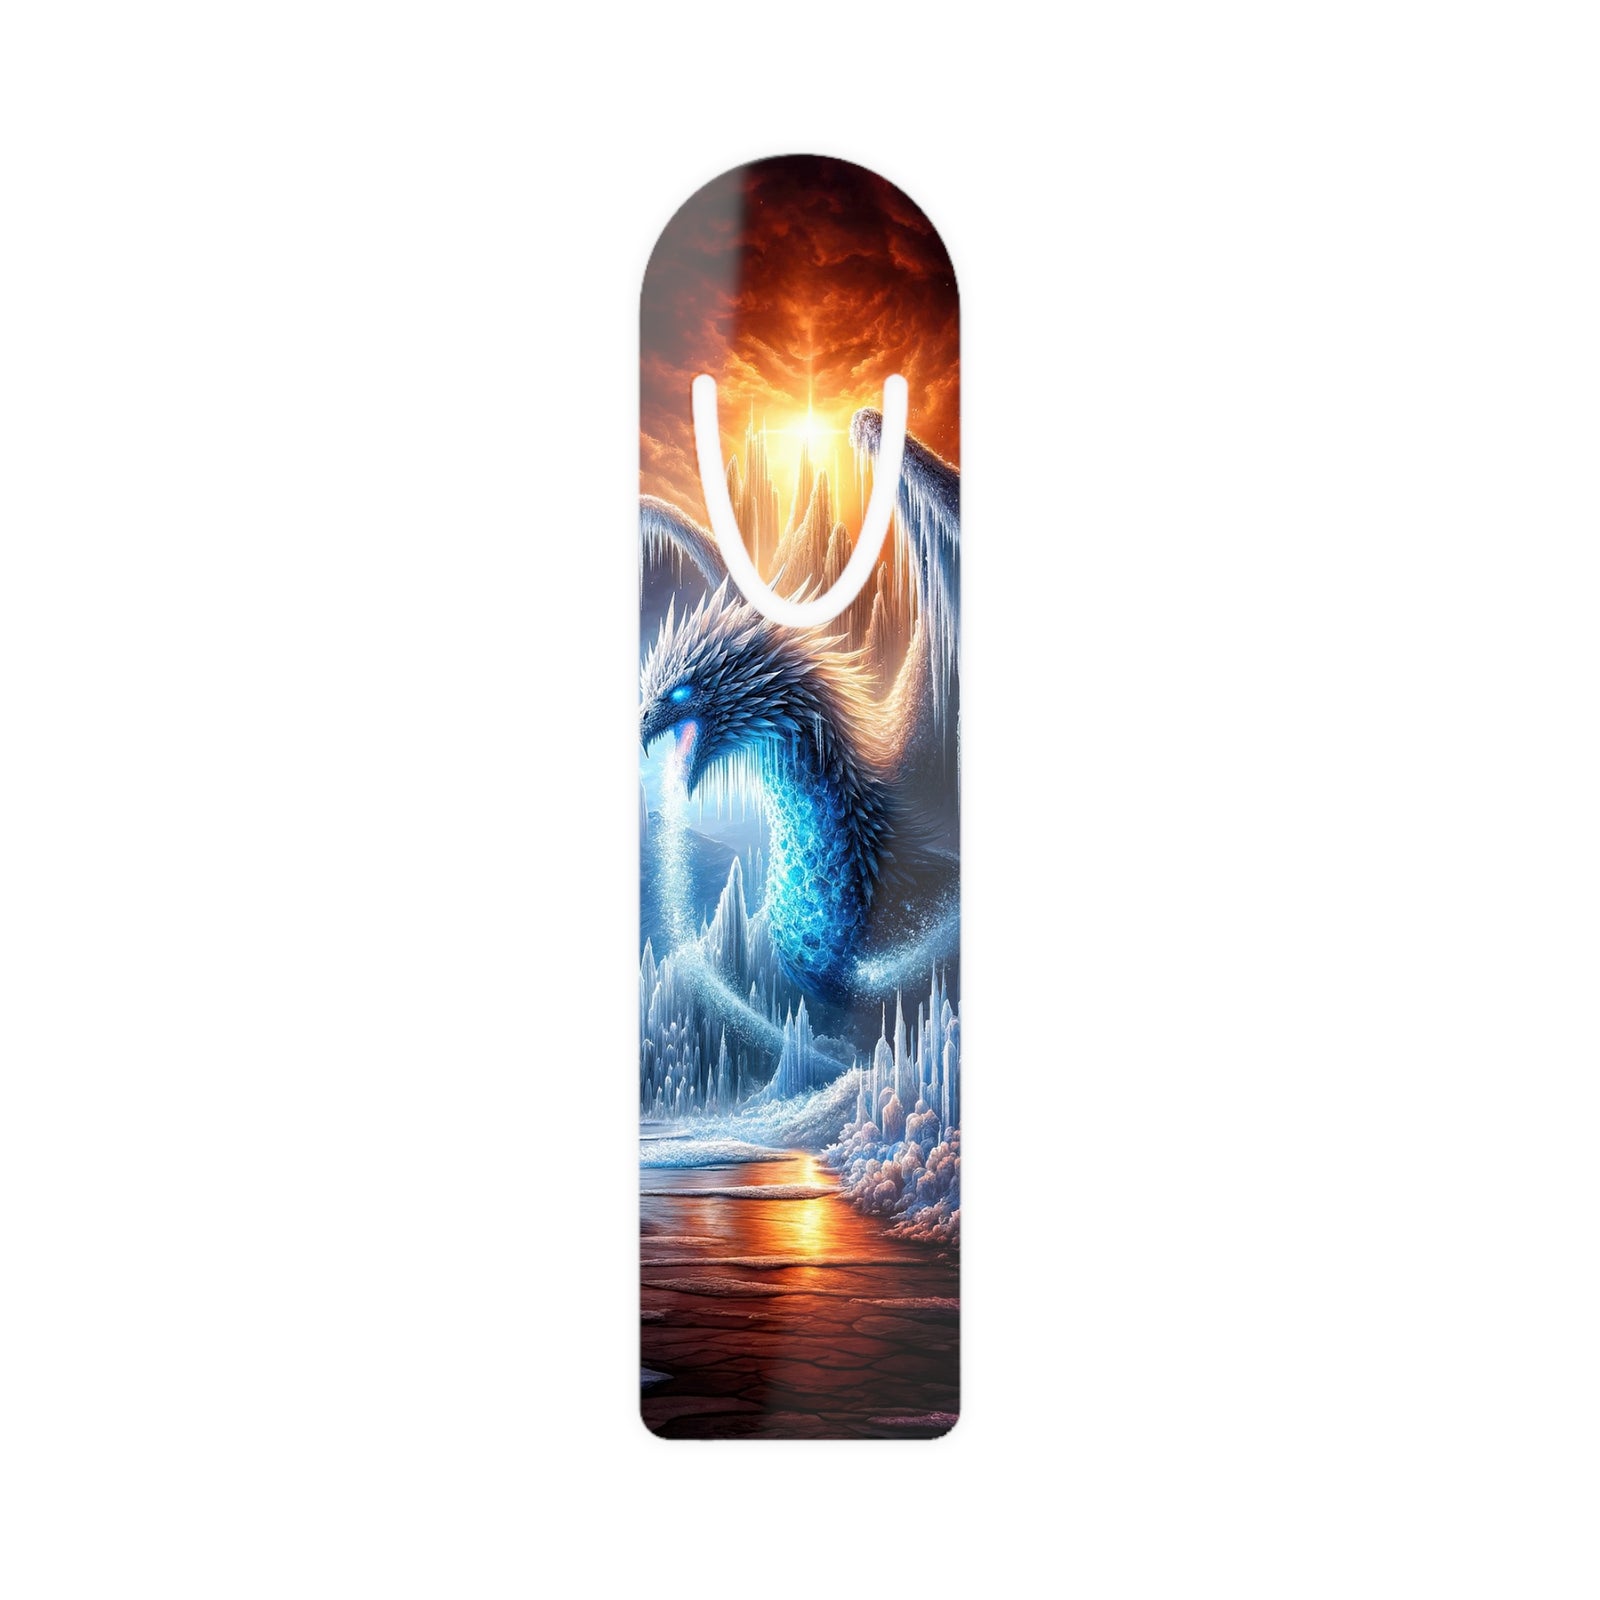 Frostbound Sovereign The Ice Dragon's Lair Bookmark